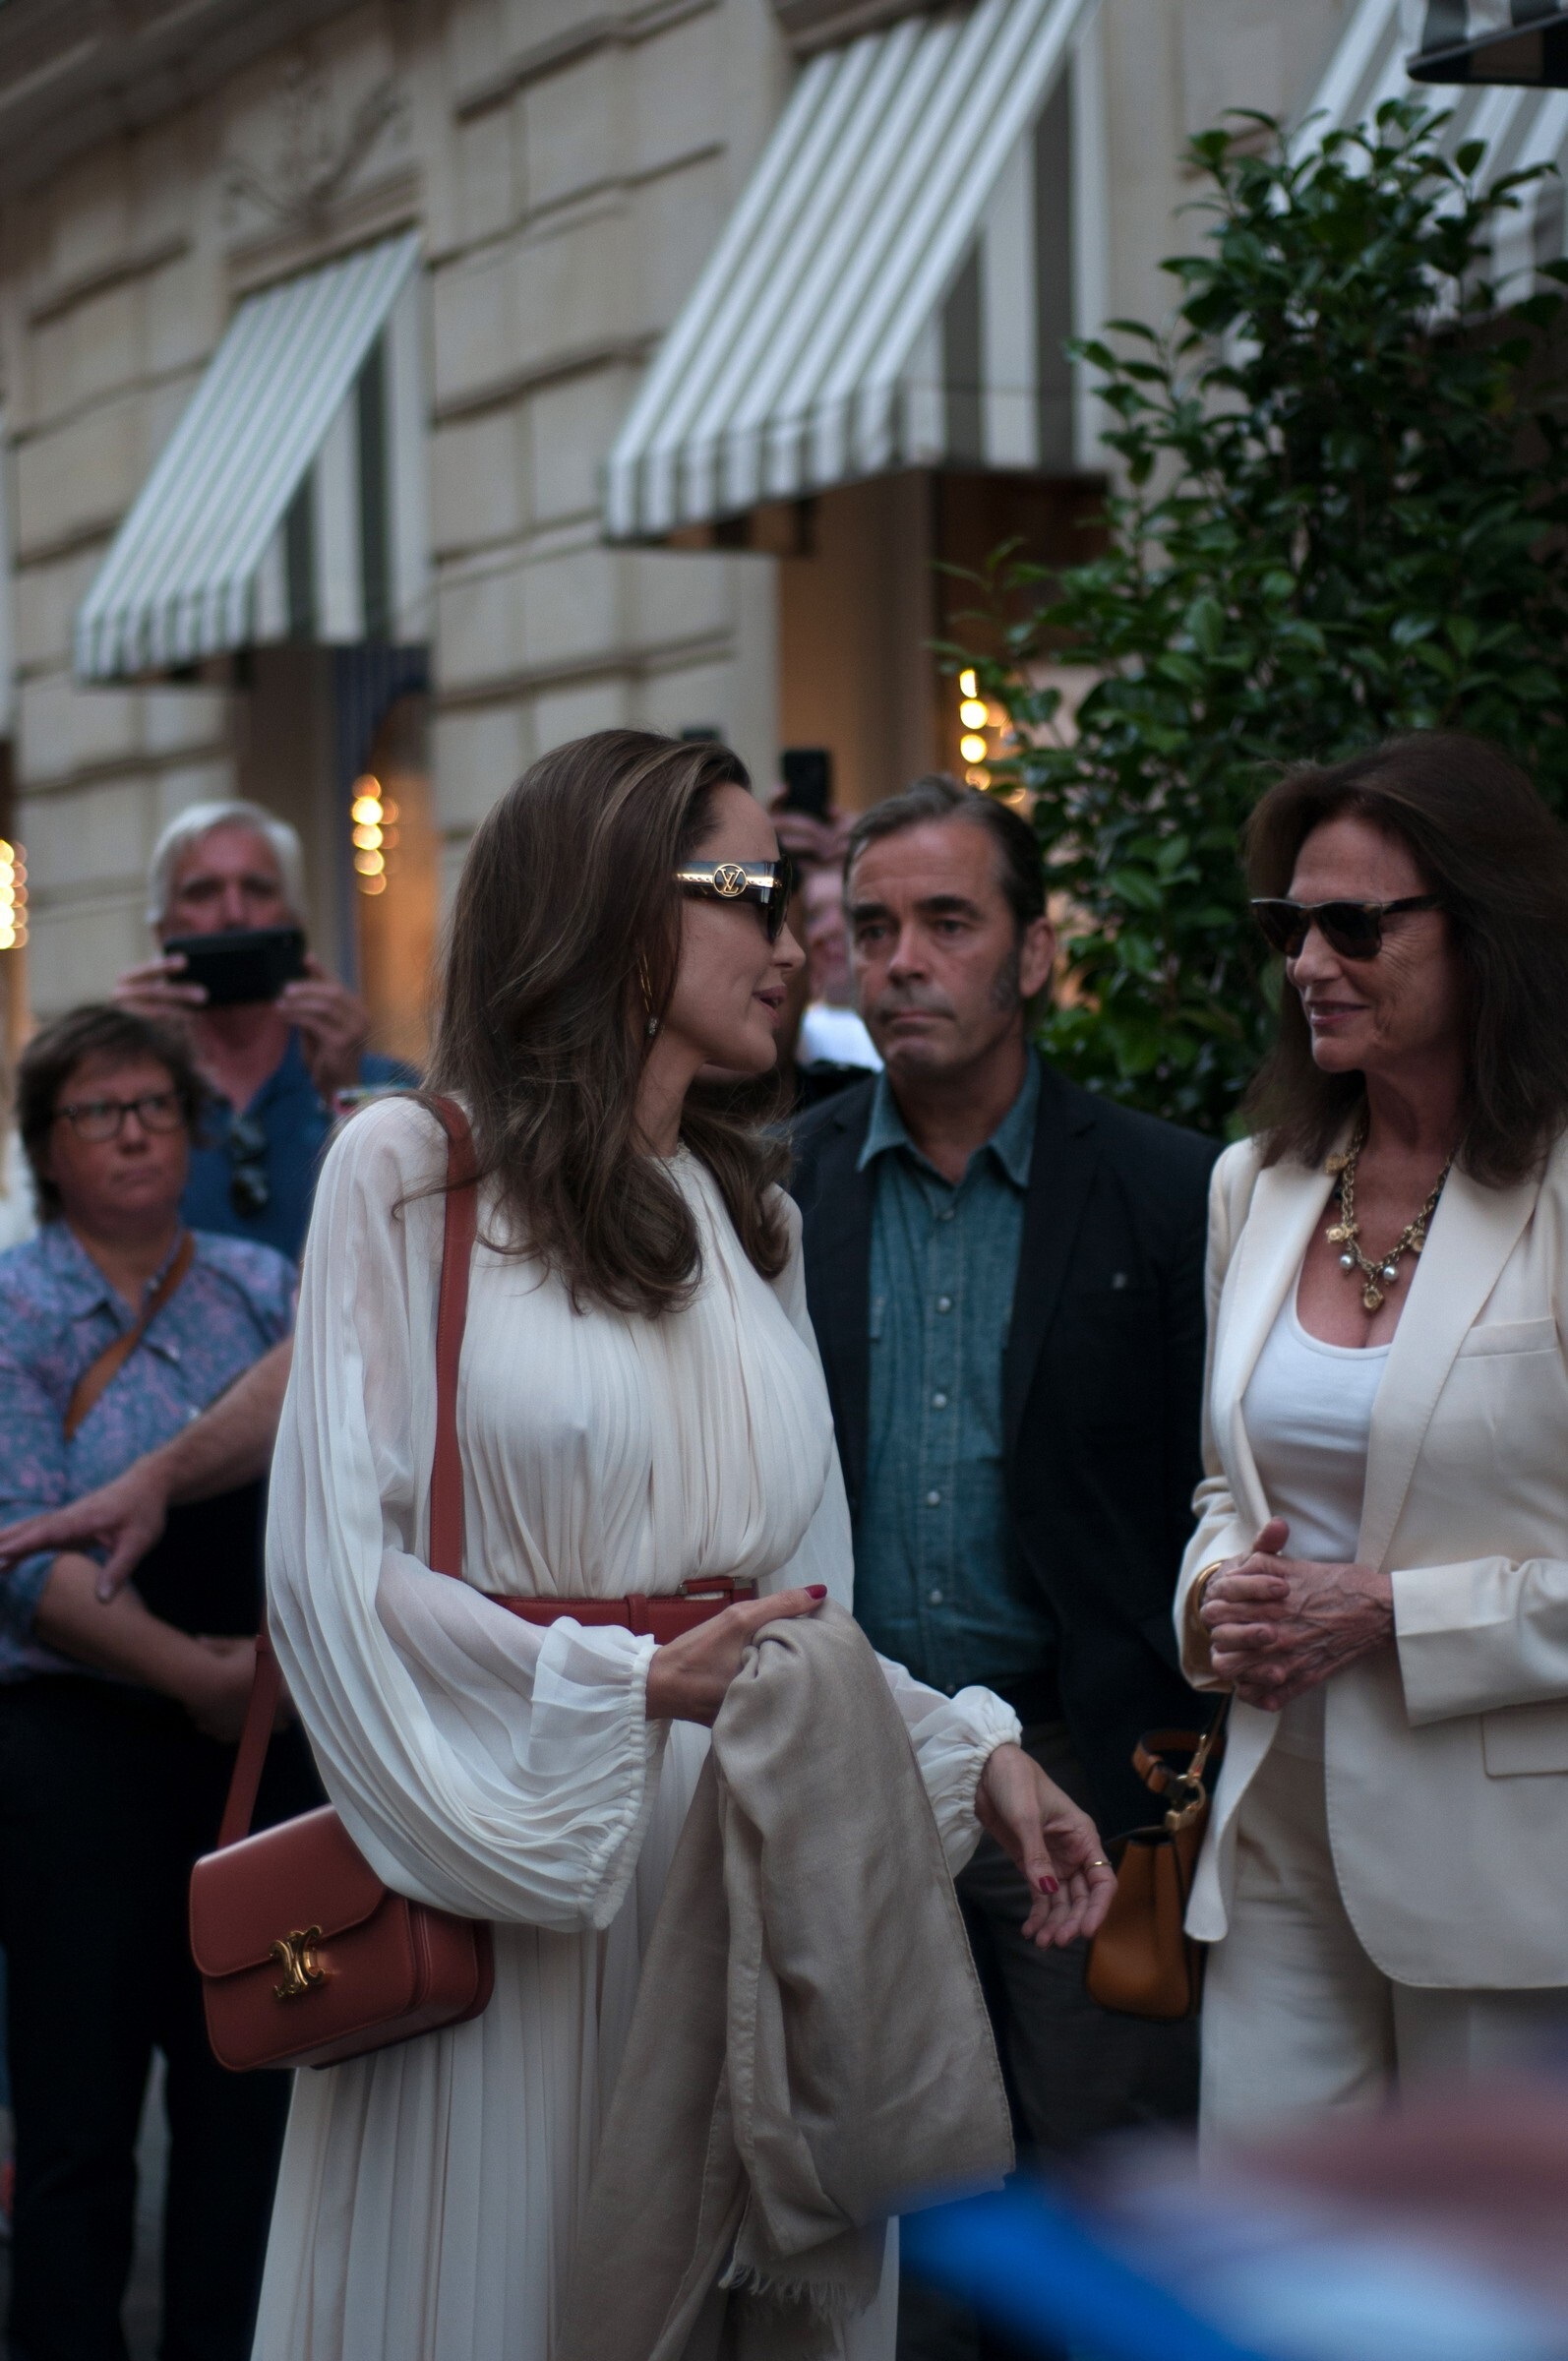 Angelina Jolie Spotted With Jacqueline Bisset At Paris